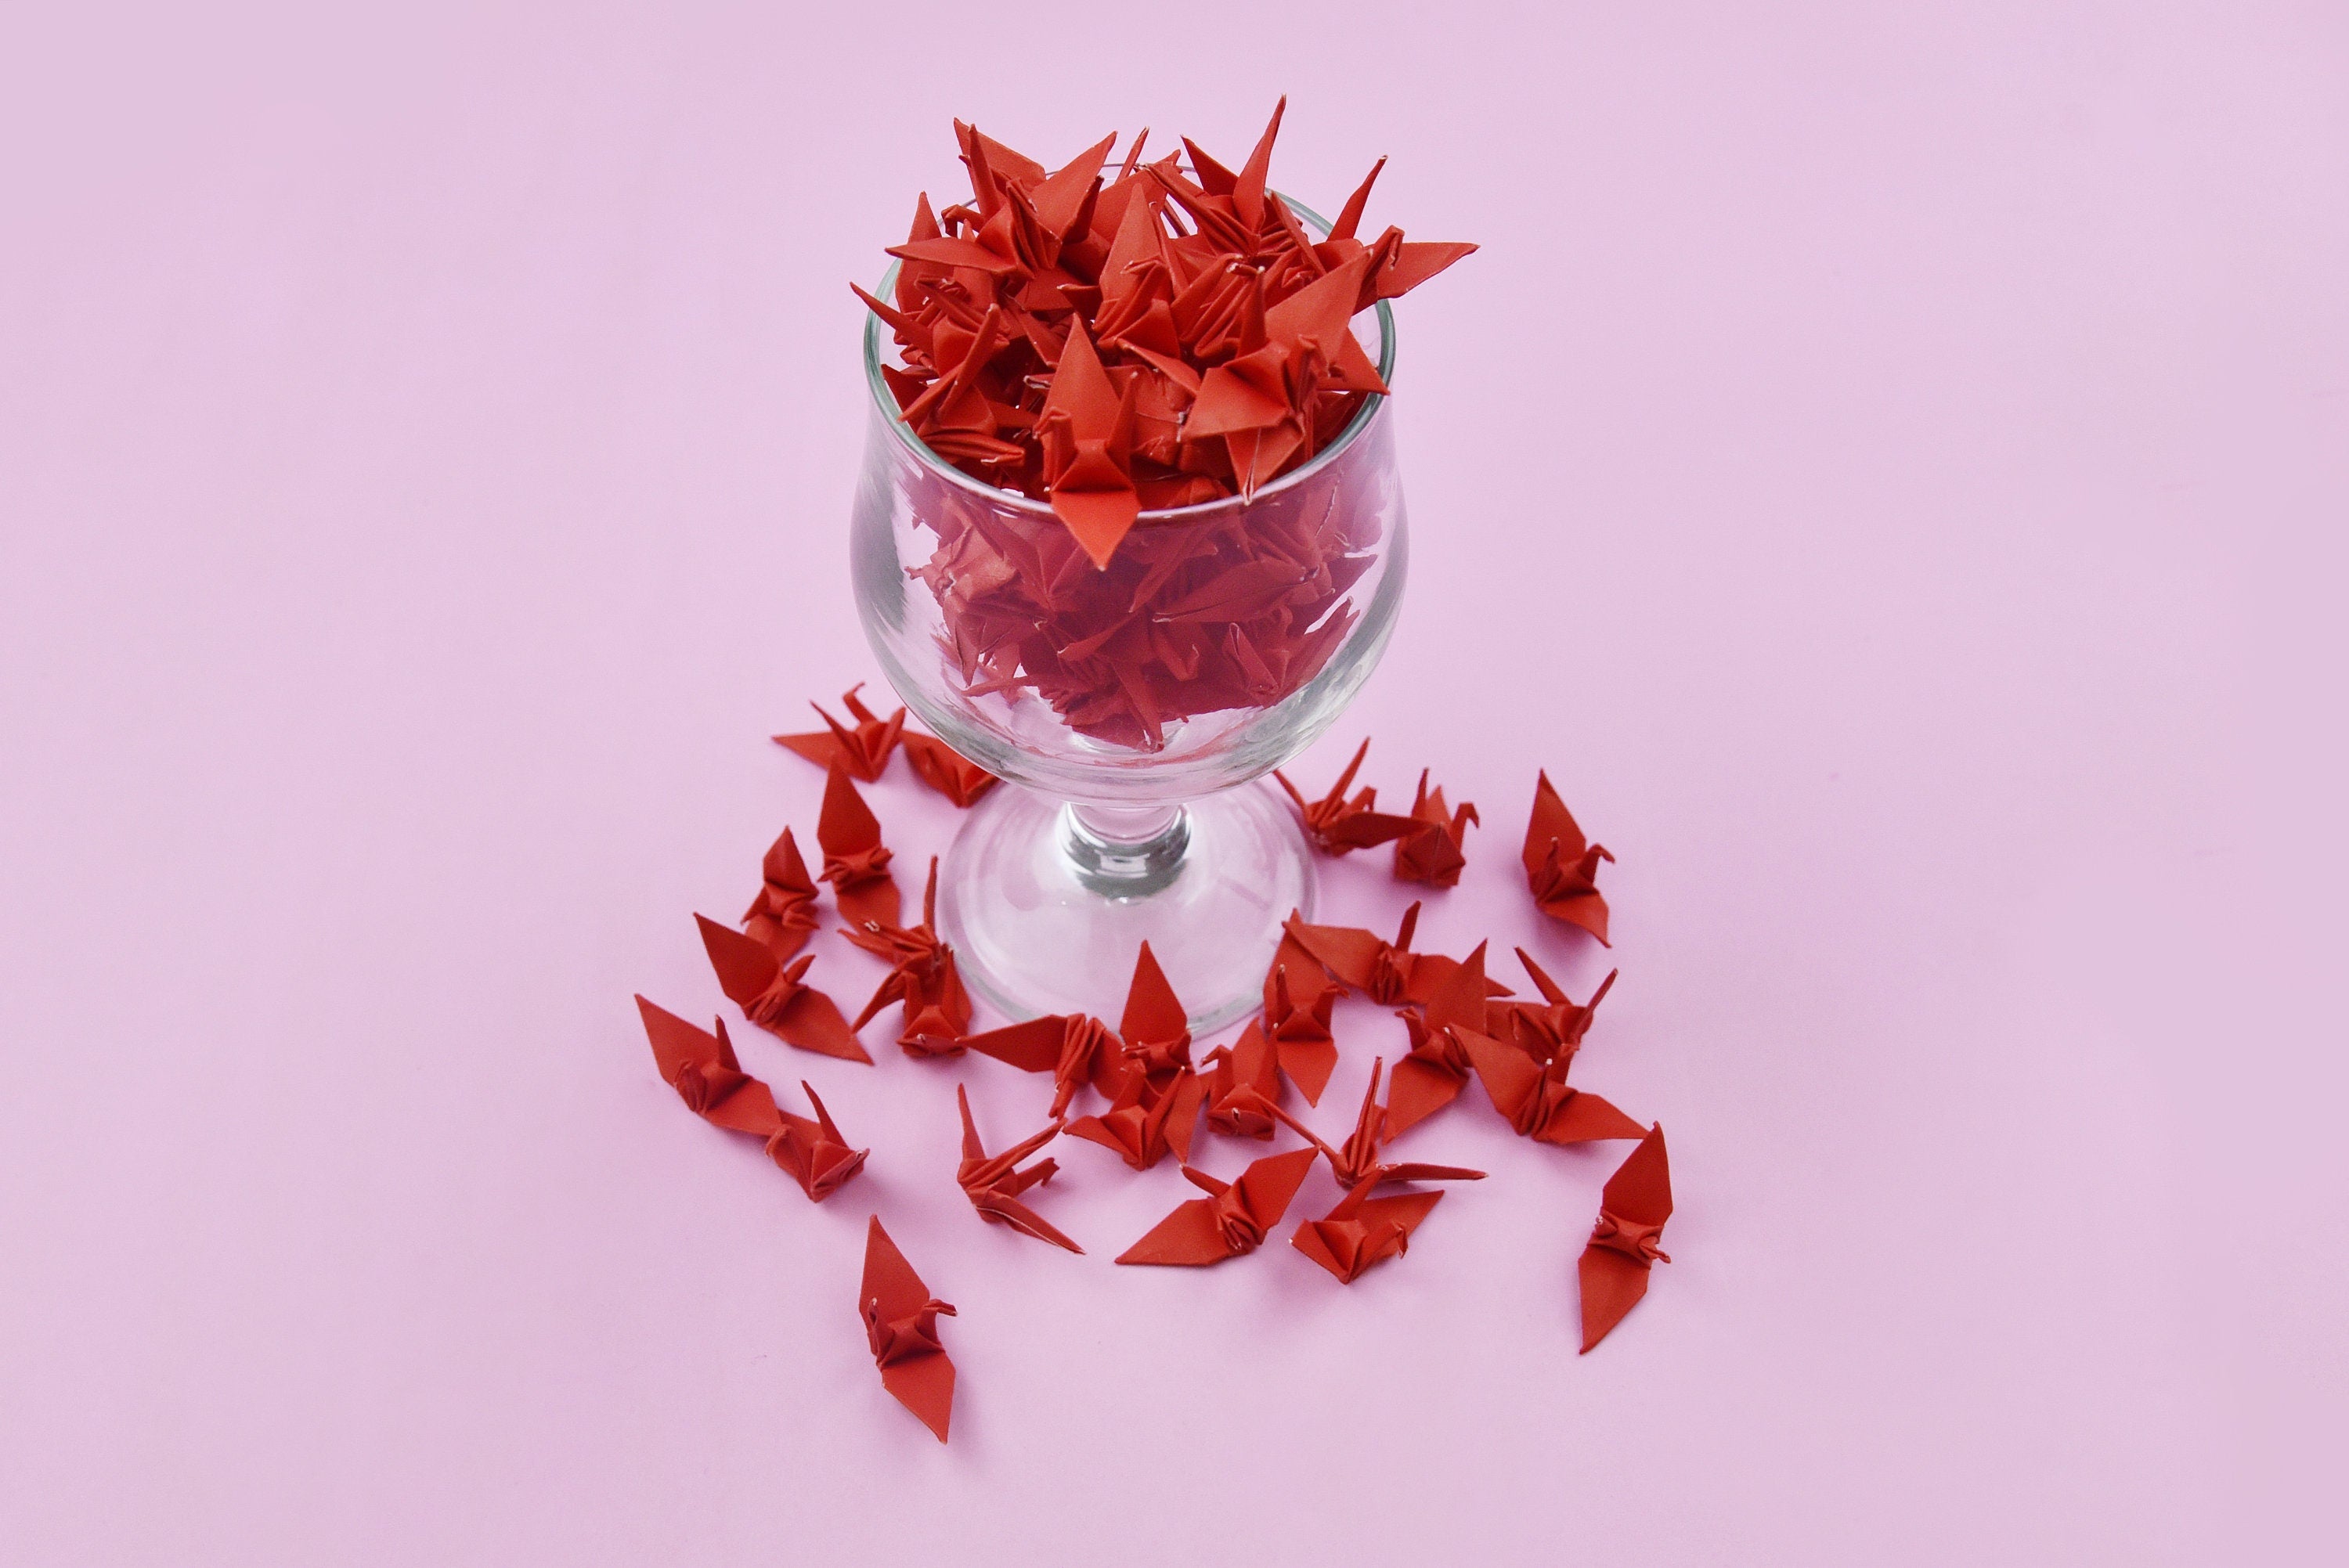 1000 Origami Paper Cranes, Small 1.5x1.5 inches Red Color for Ornament, Decoration, Wedding Gift